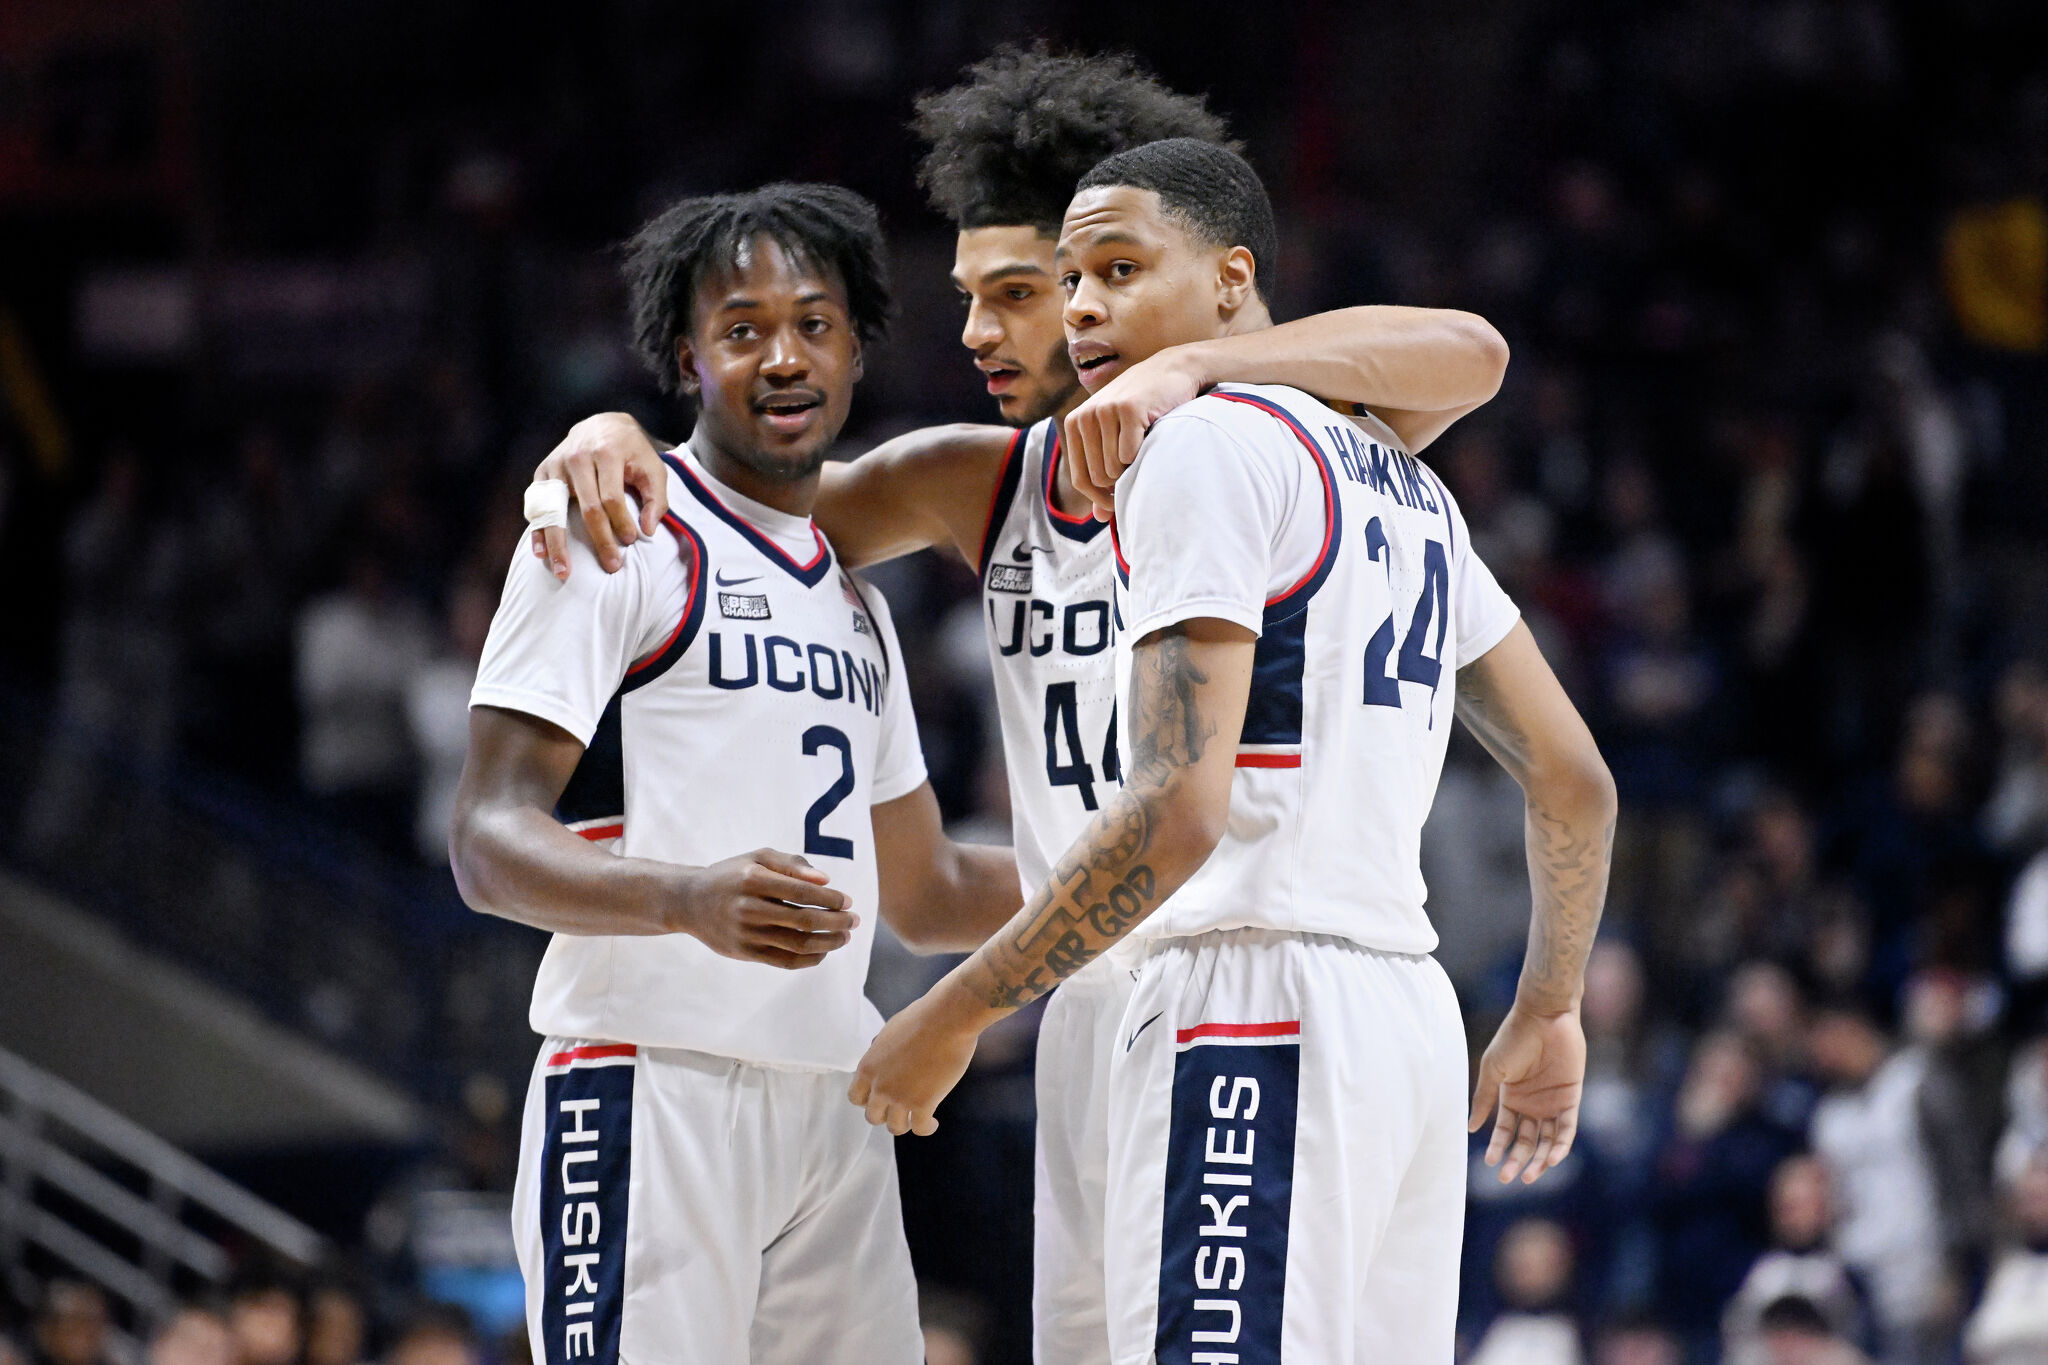 UConn men's No. 5 ranking this week is its highest in 11 years